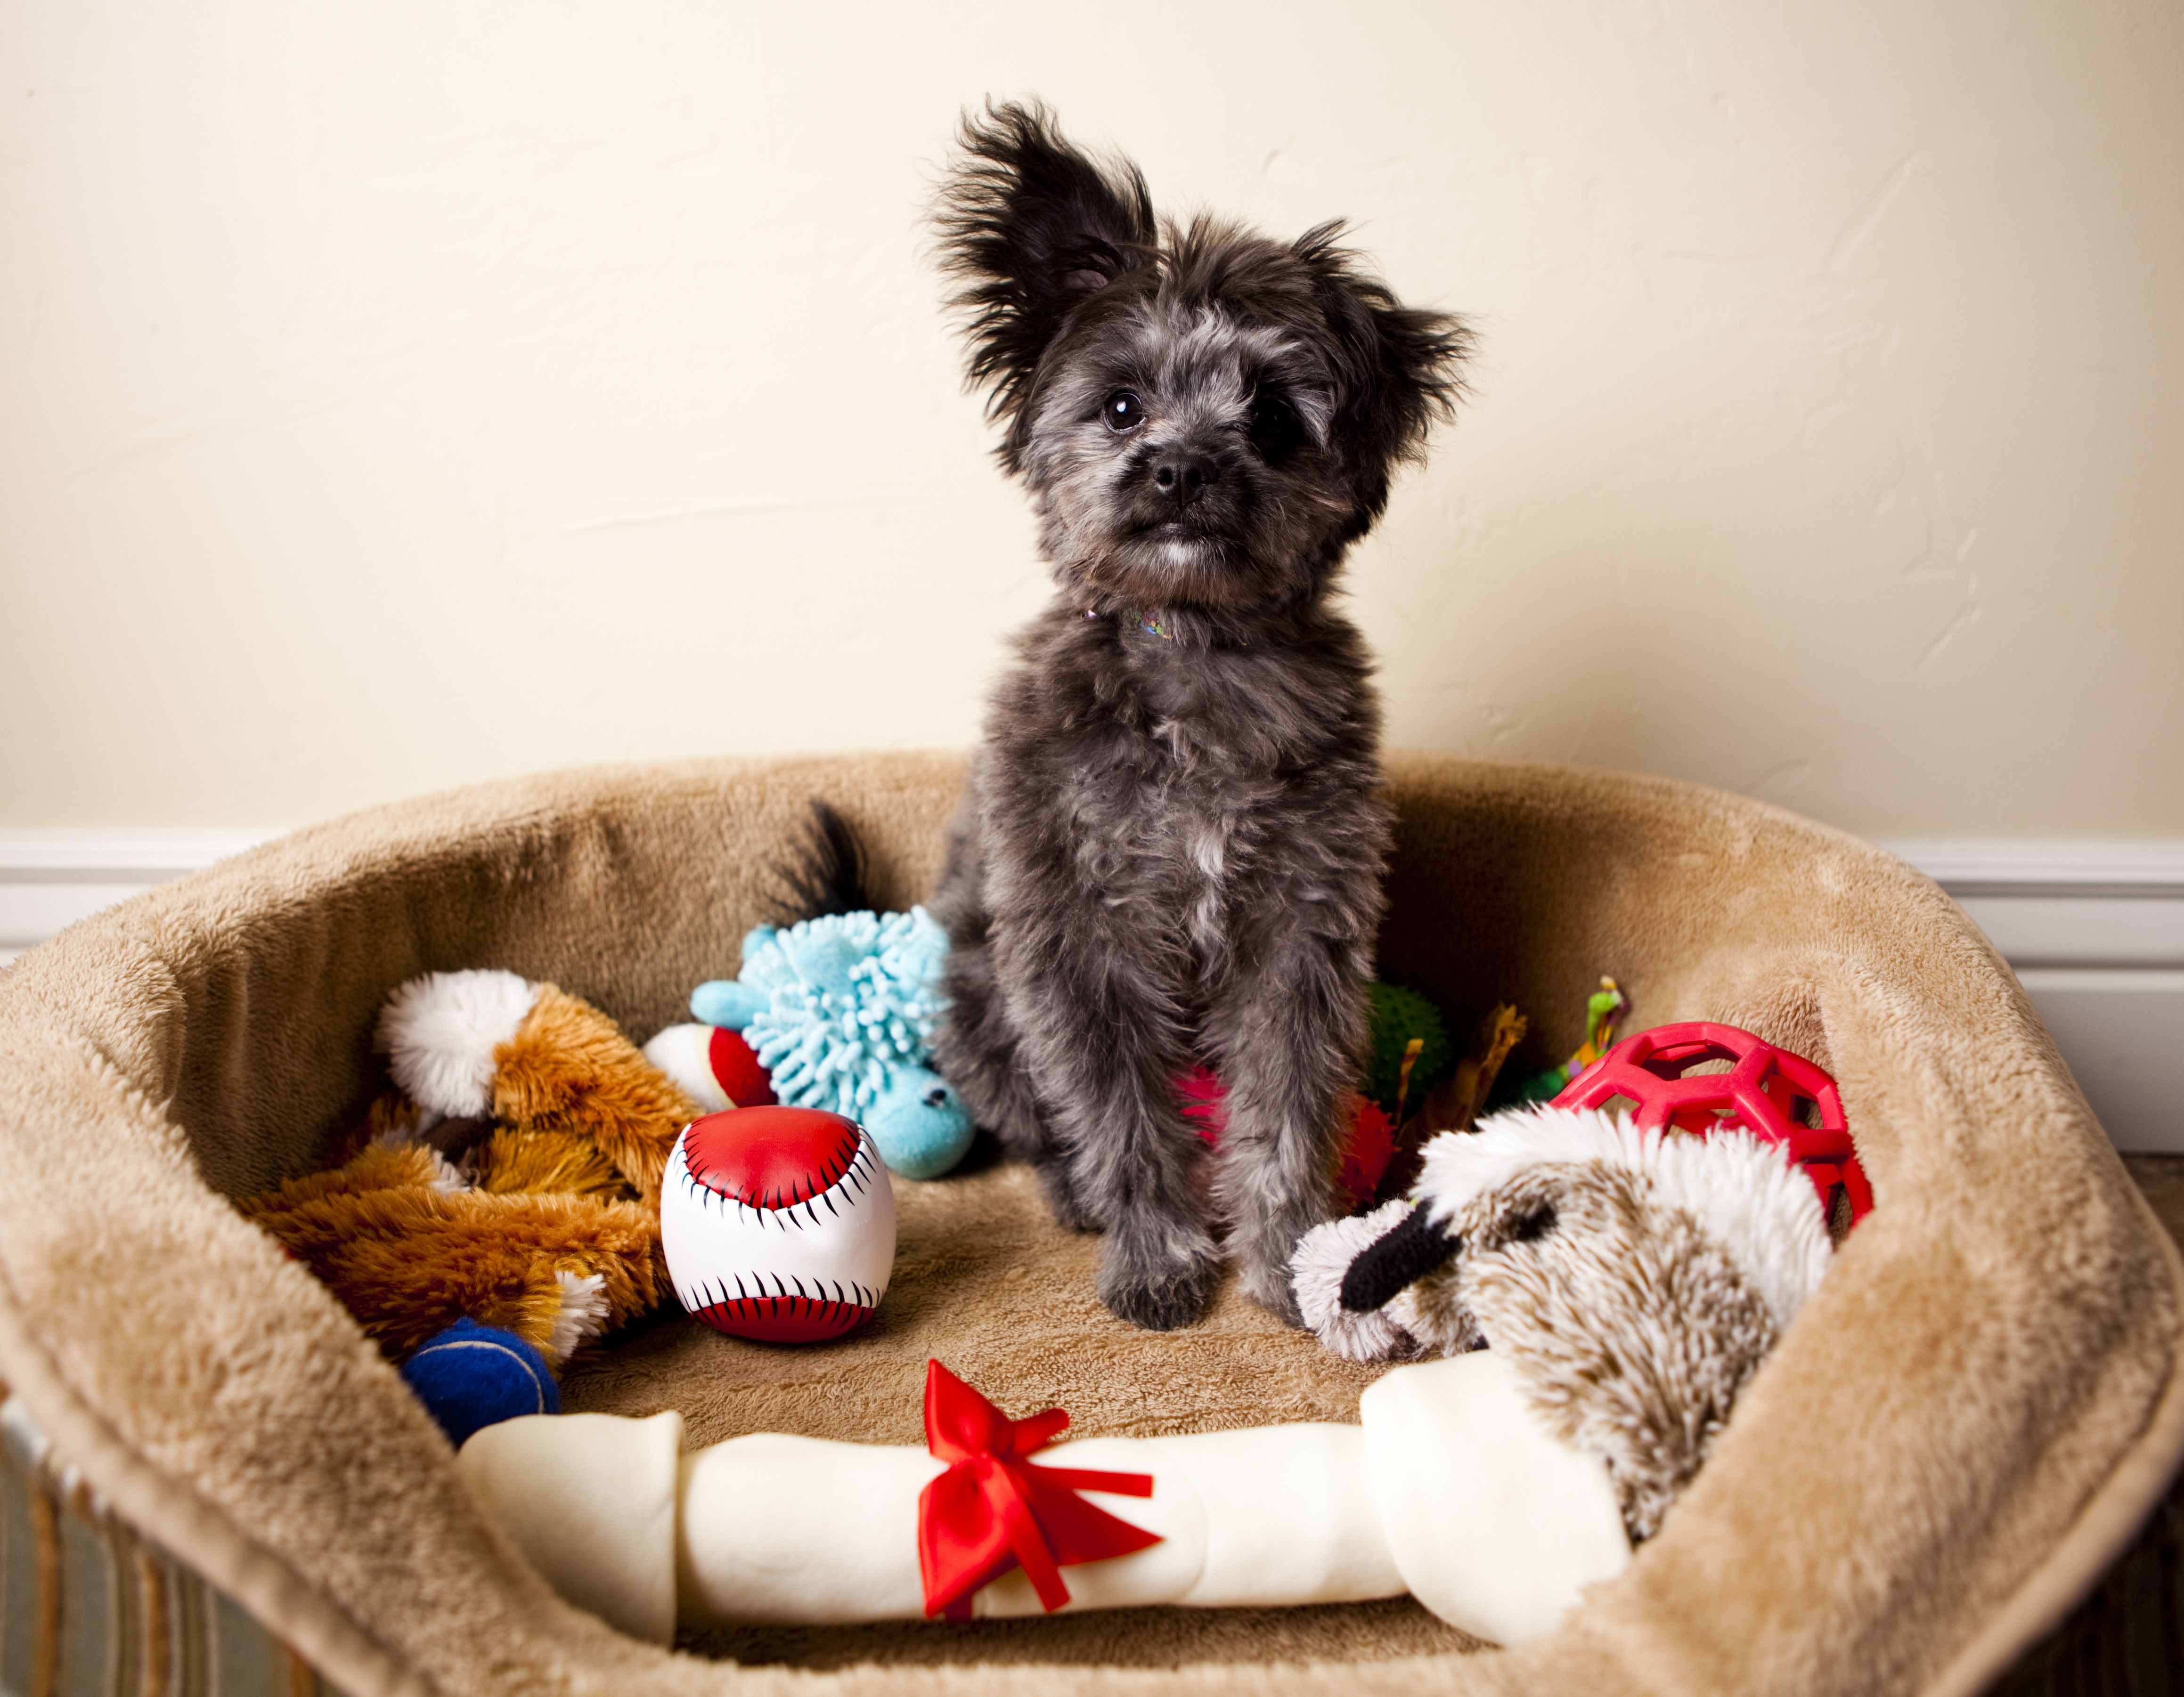 Puppy in a brown dog bed with toys.